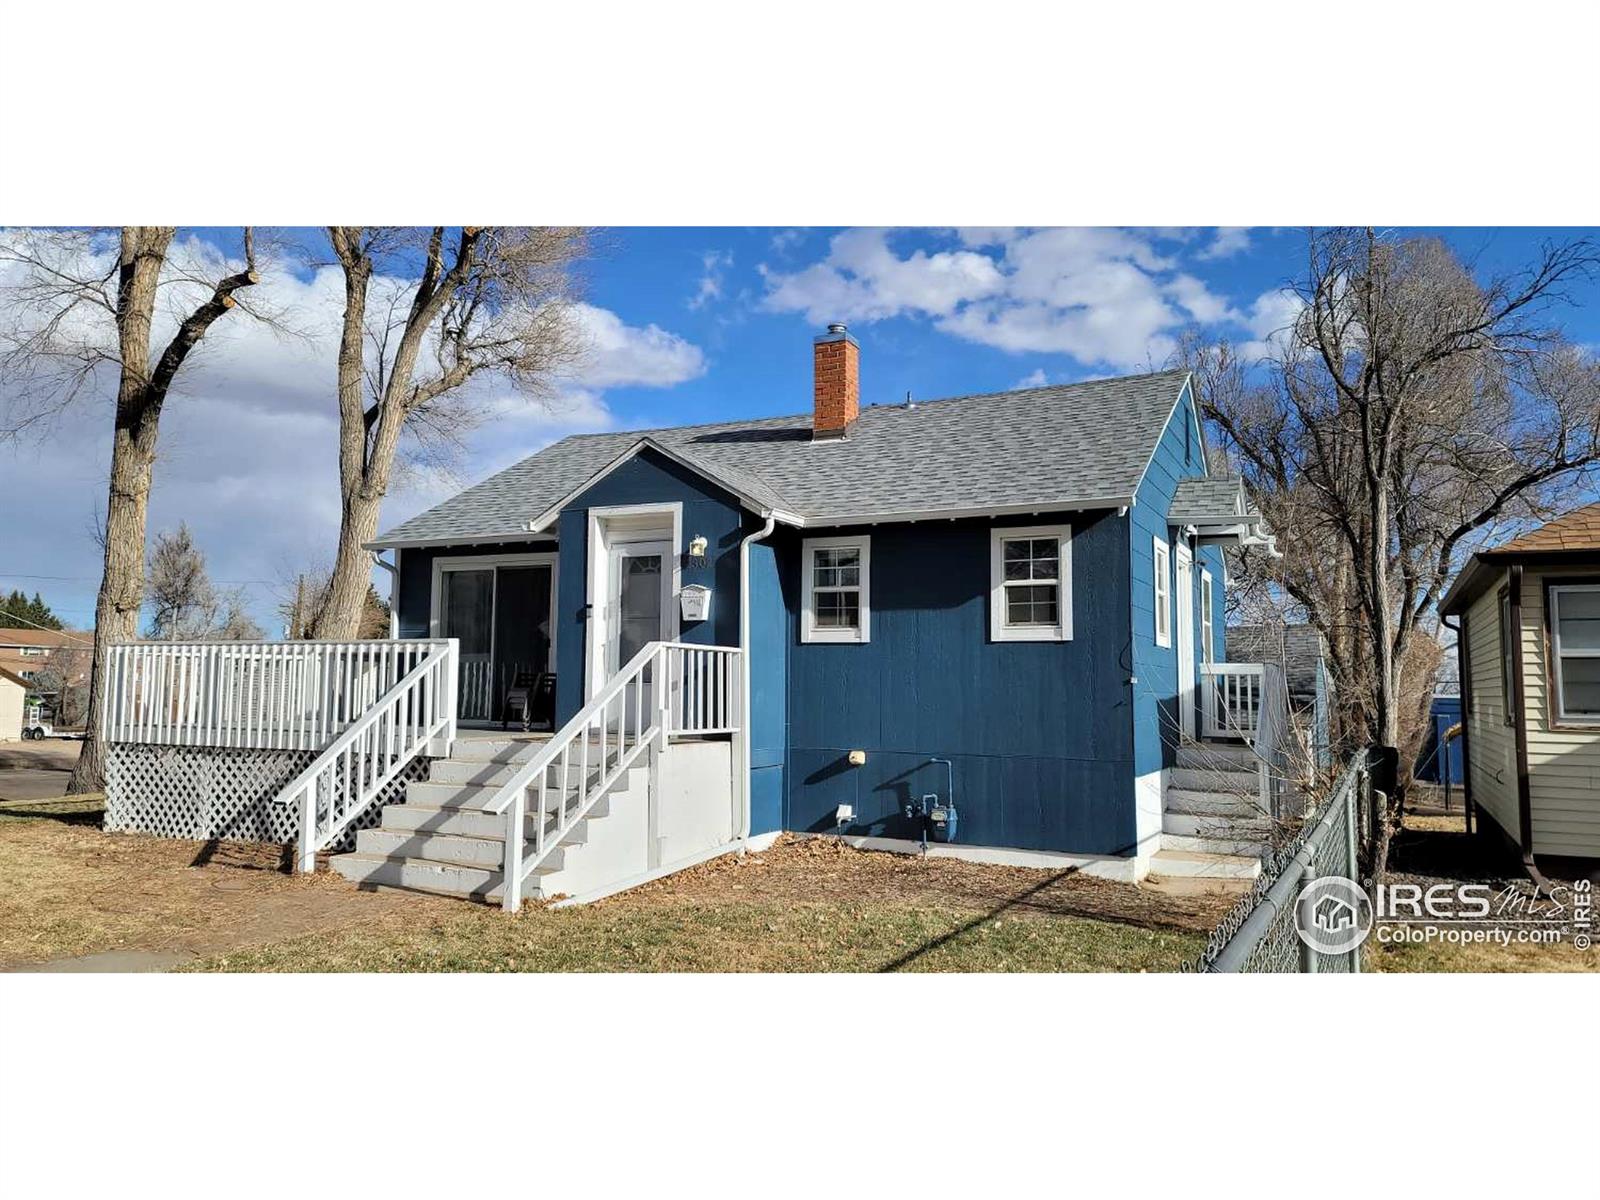 2302 9th, Greeley, CO